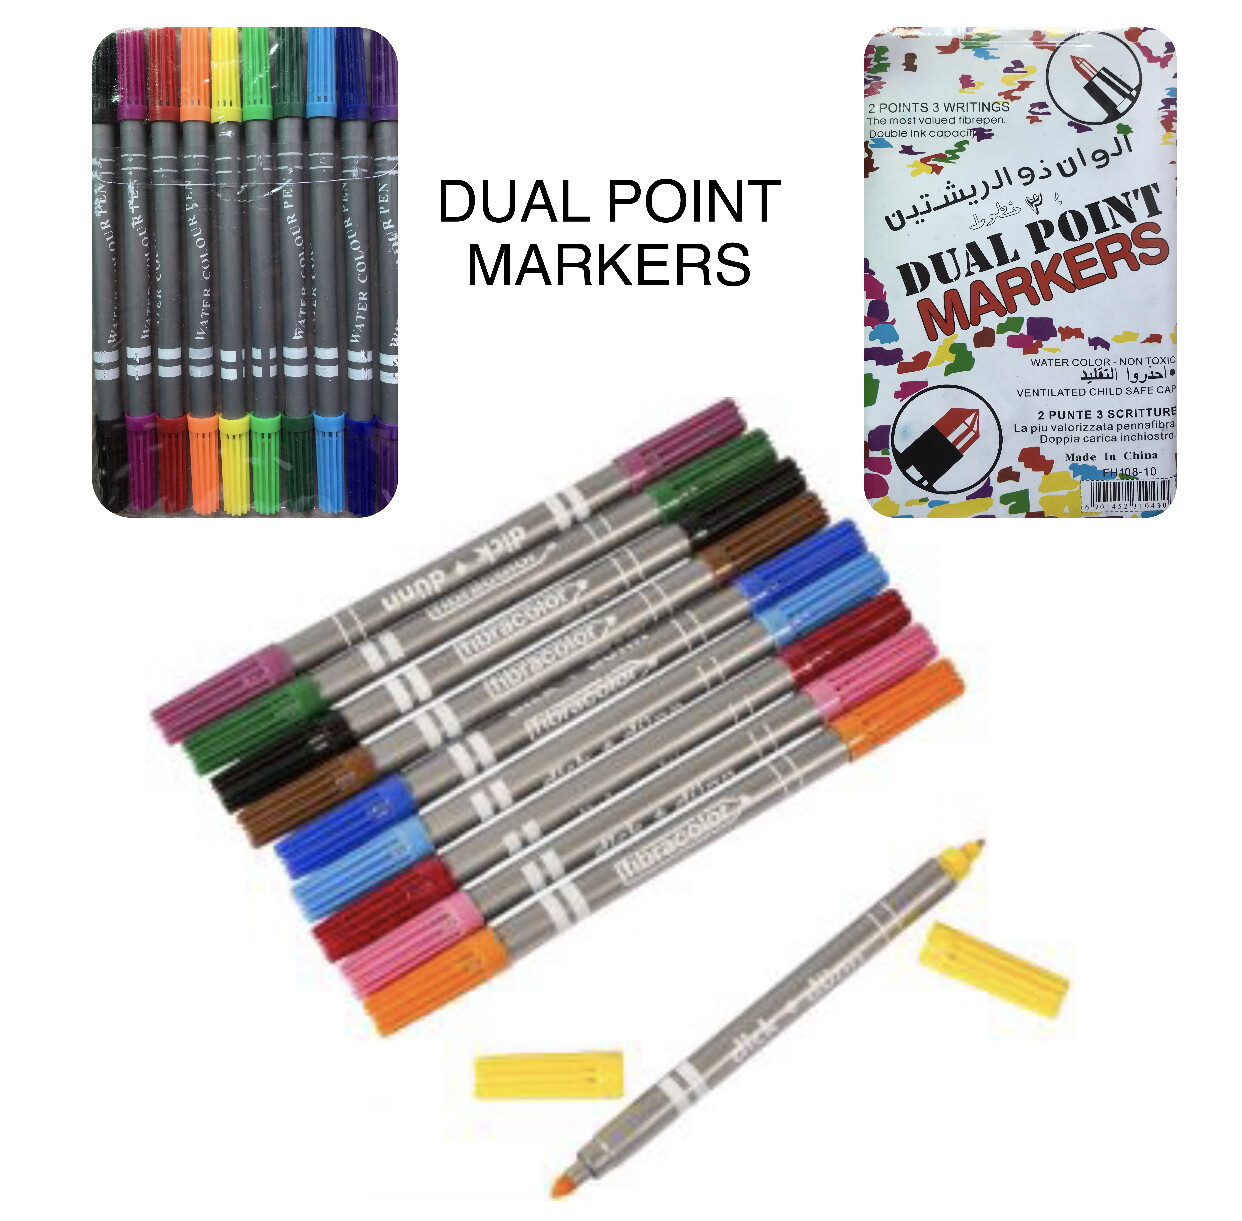 Dual Point Markers